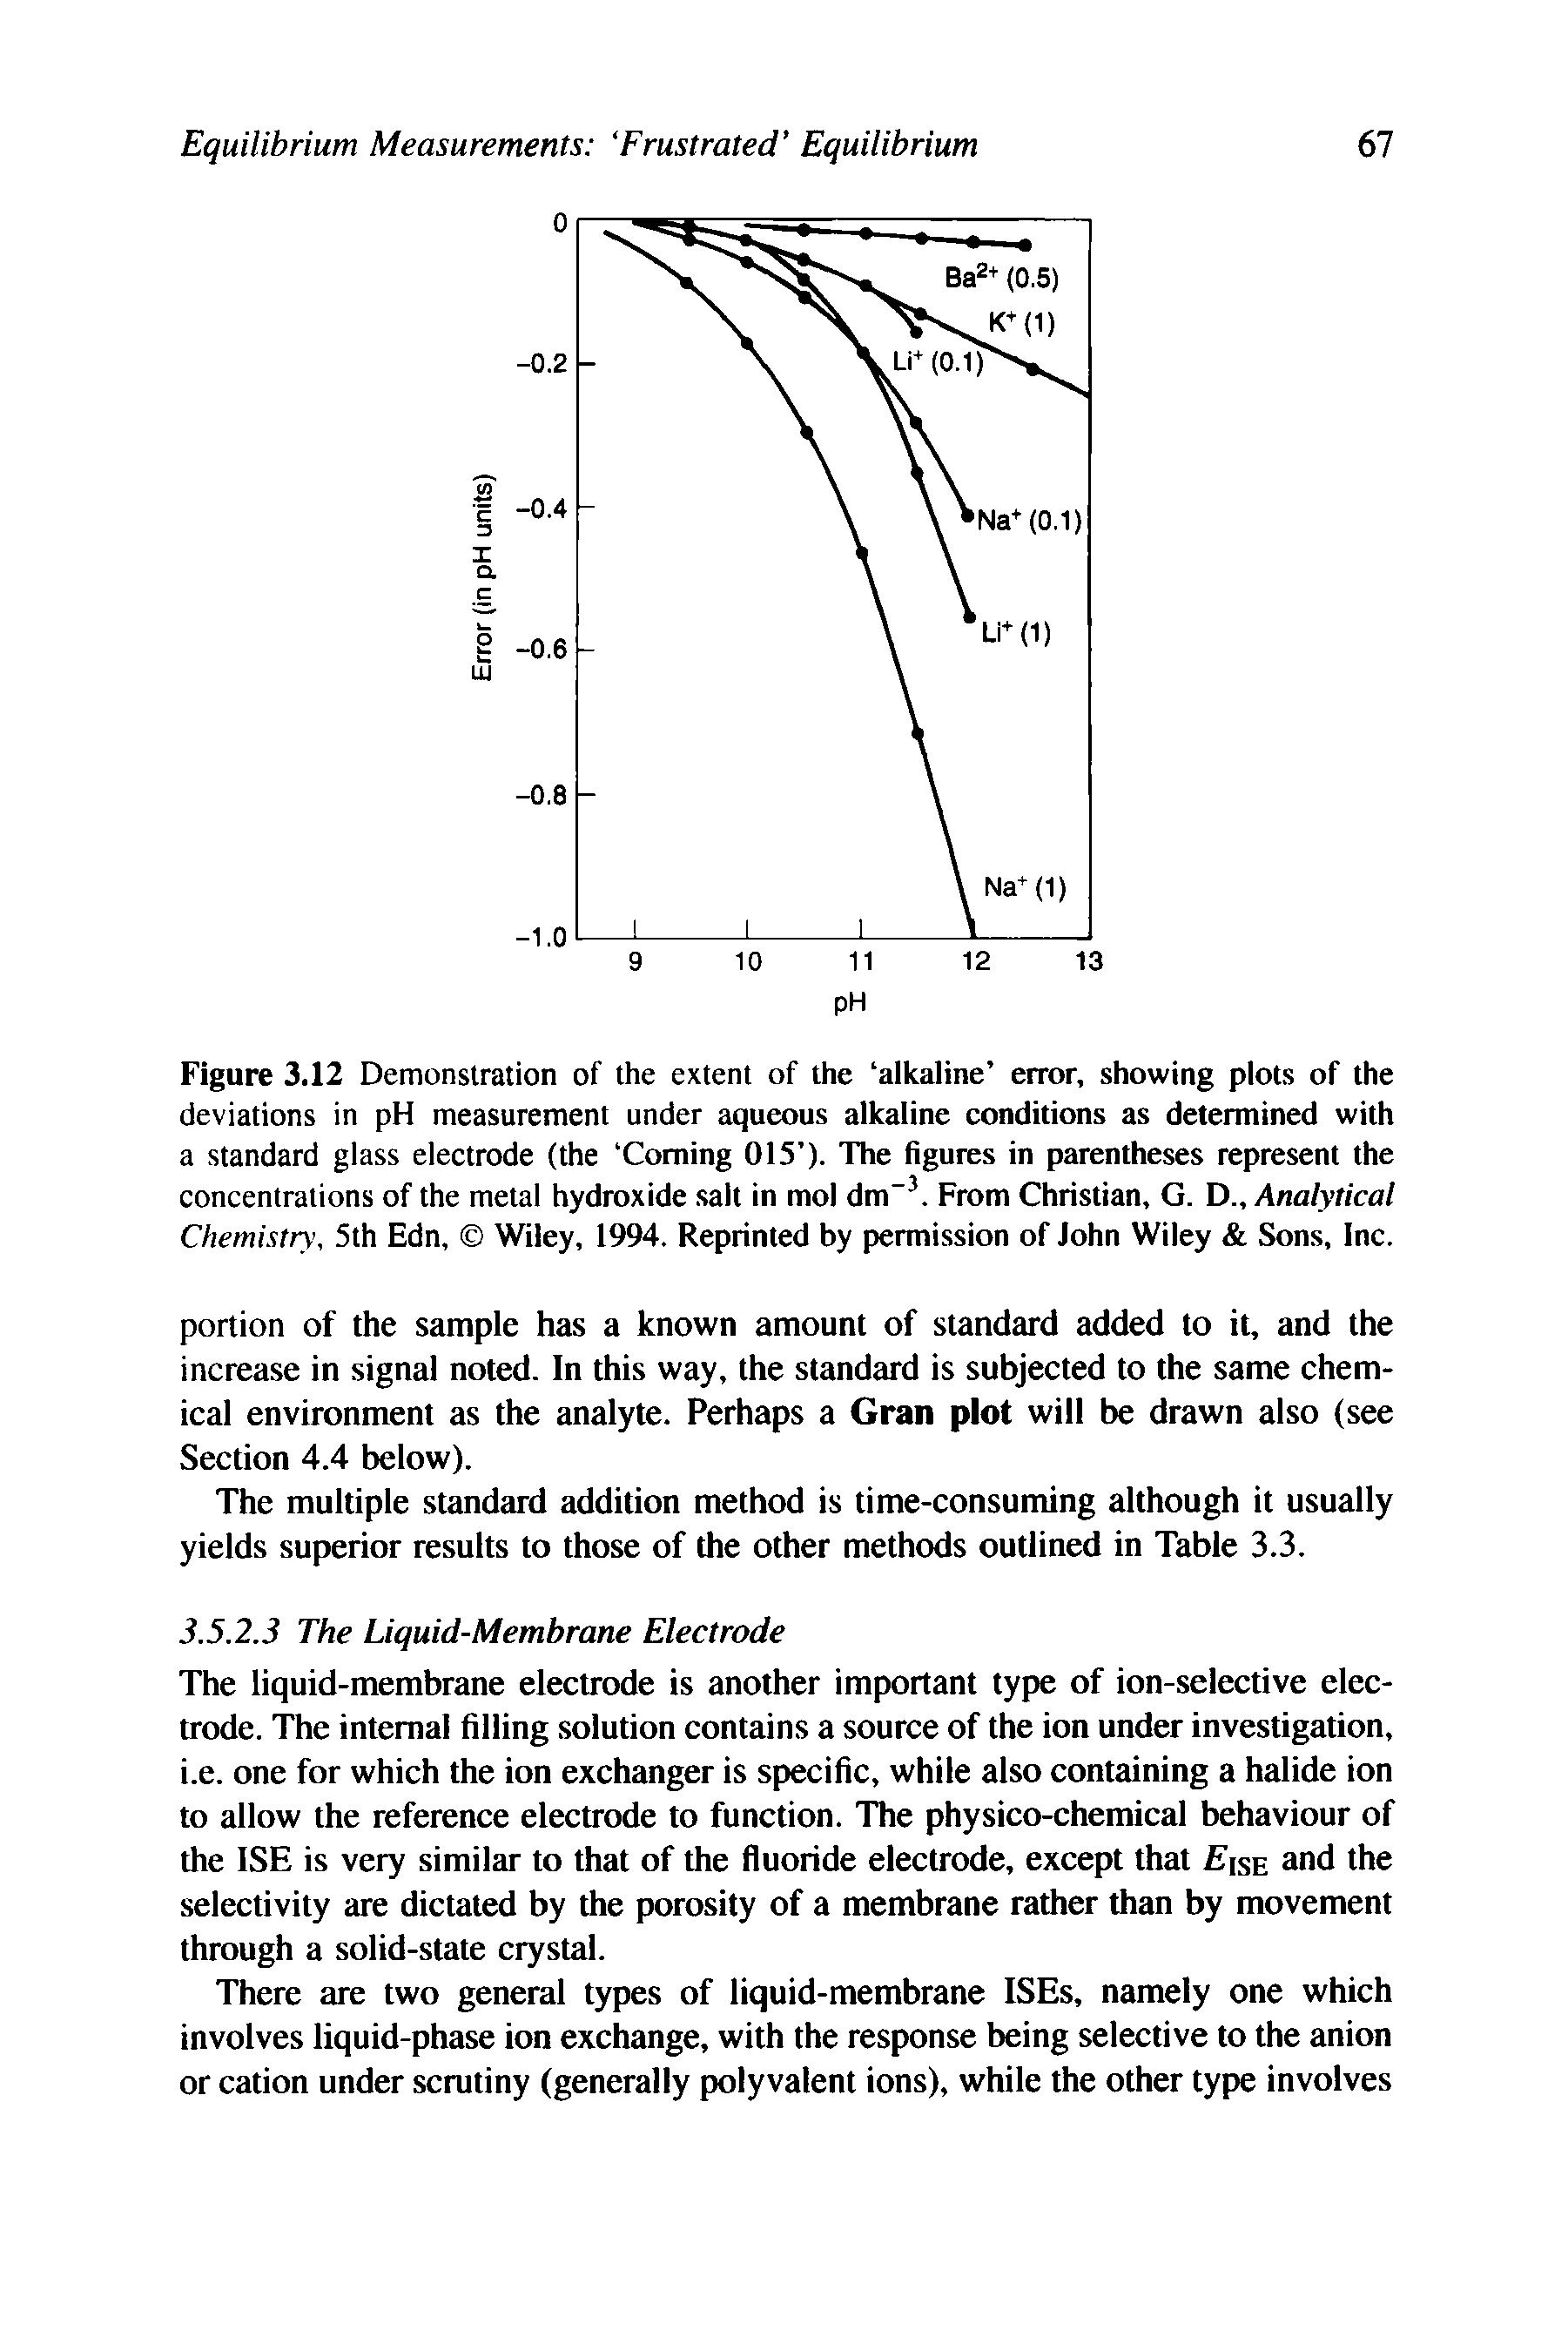 Figure 3.12 Demonstration of the extent of the alkaline error, showing plots of the deviations in pH measurement under aqueous alkaline conditions as determined with a standard glass electrode (the Coming 015 ). The figures in parentheses represent the concentrations of the metal hydroxide salt in mol dm". From Christian, G. D., Analytical Chemistry, 5th Edn, Wiley, 1994. Reprinted by permission of John Wiley Sons, Inc.